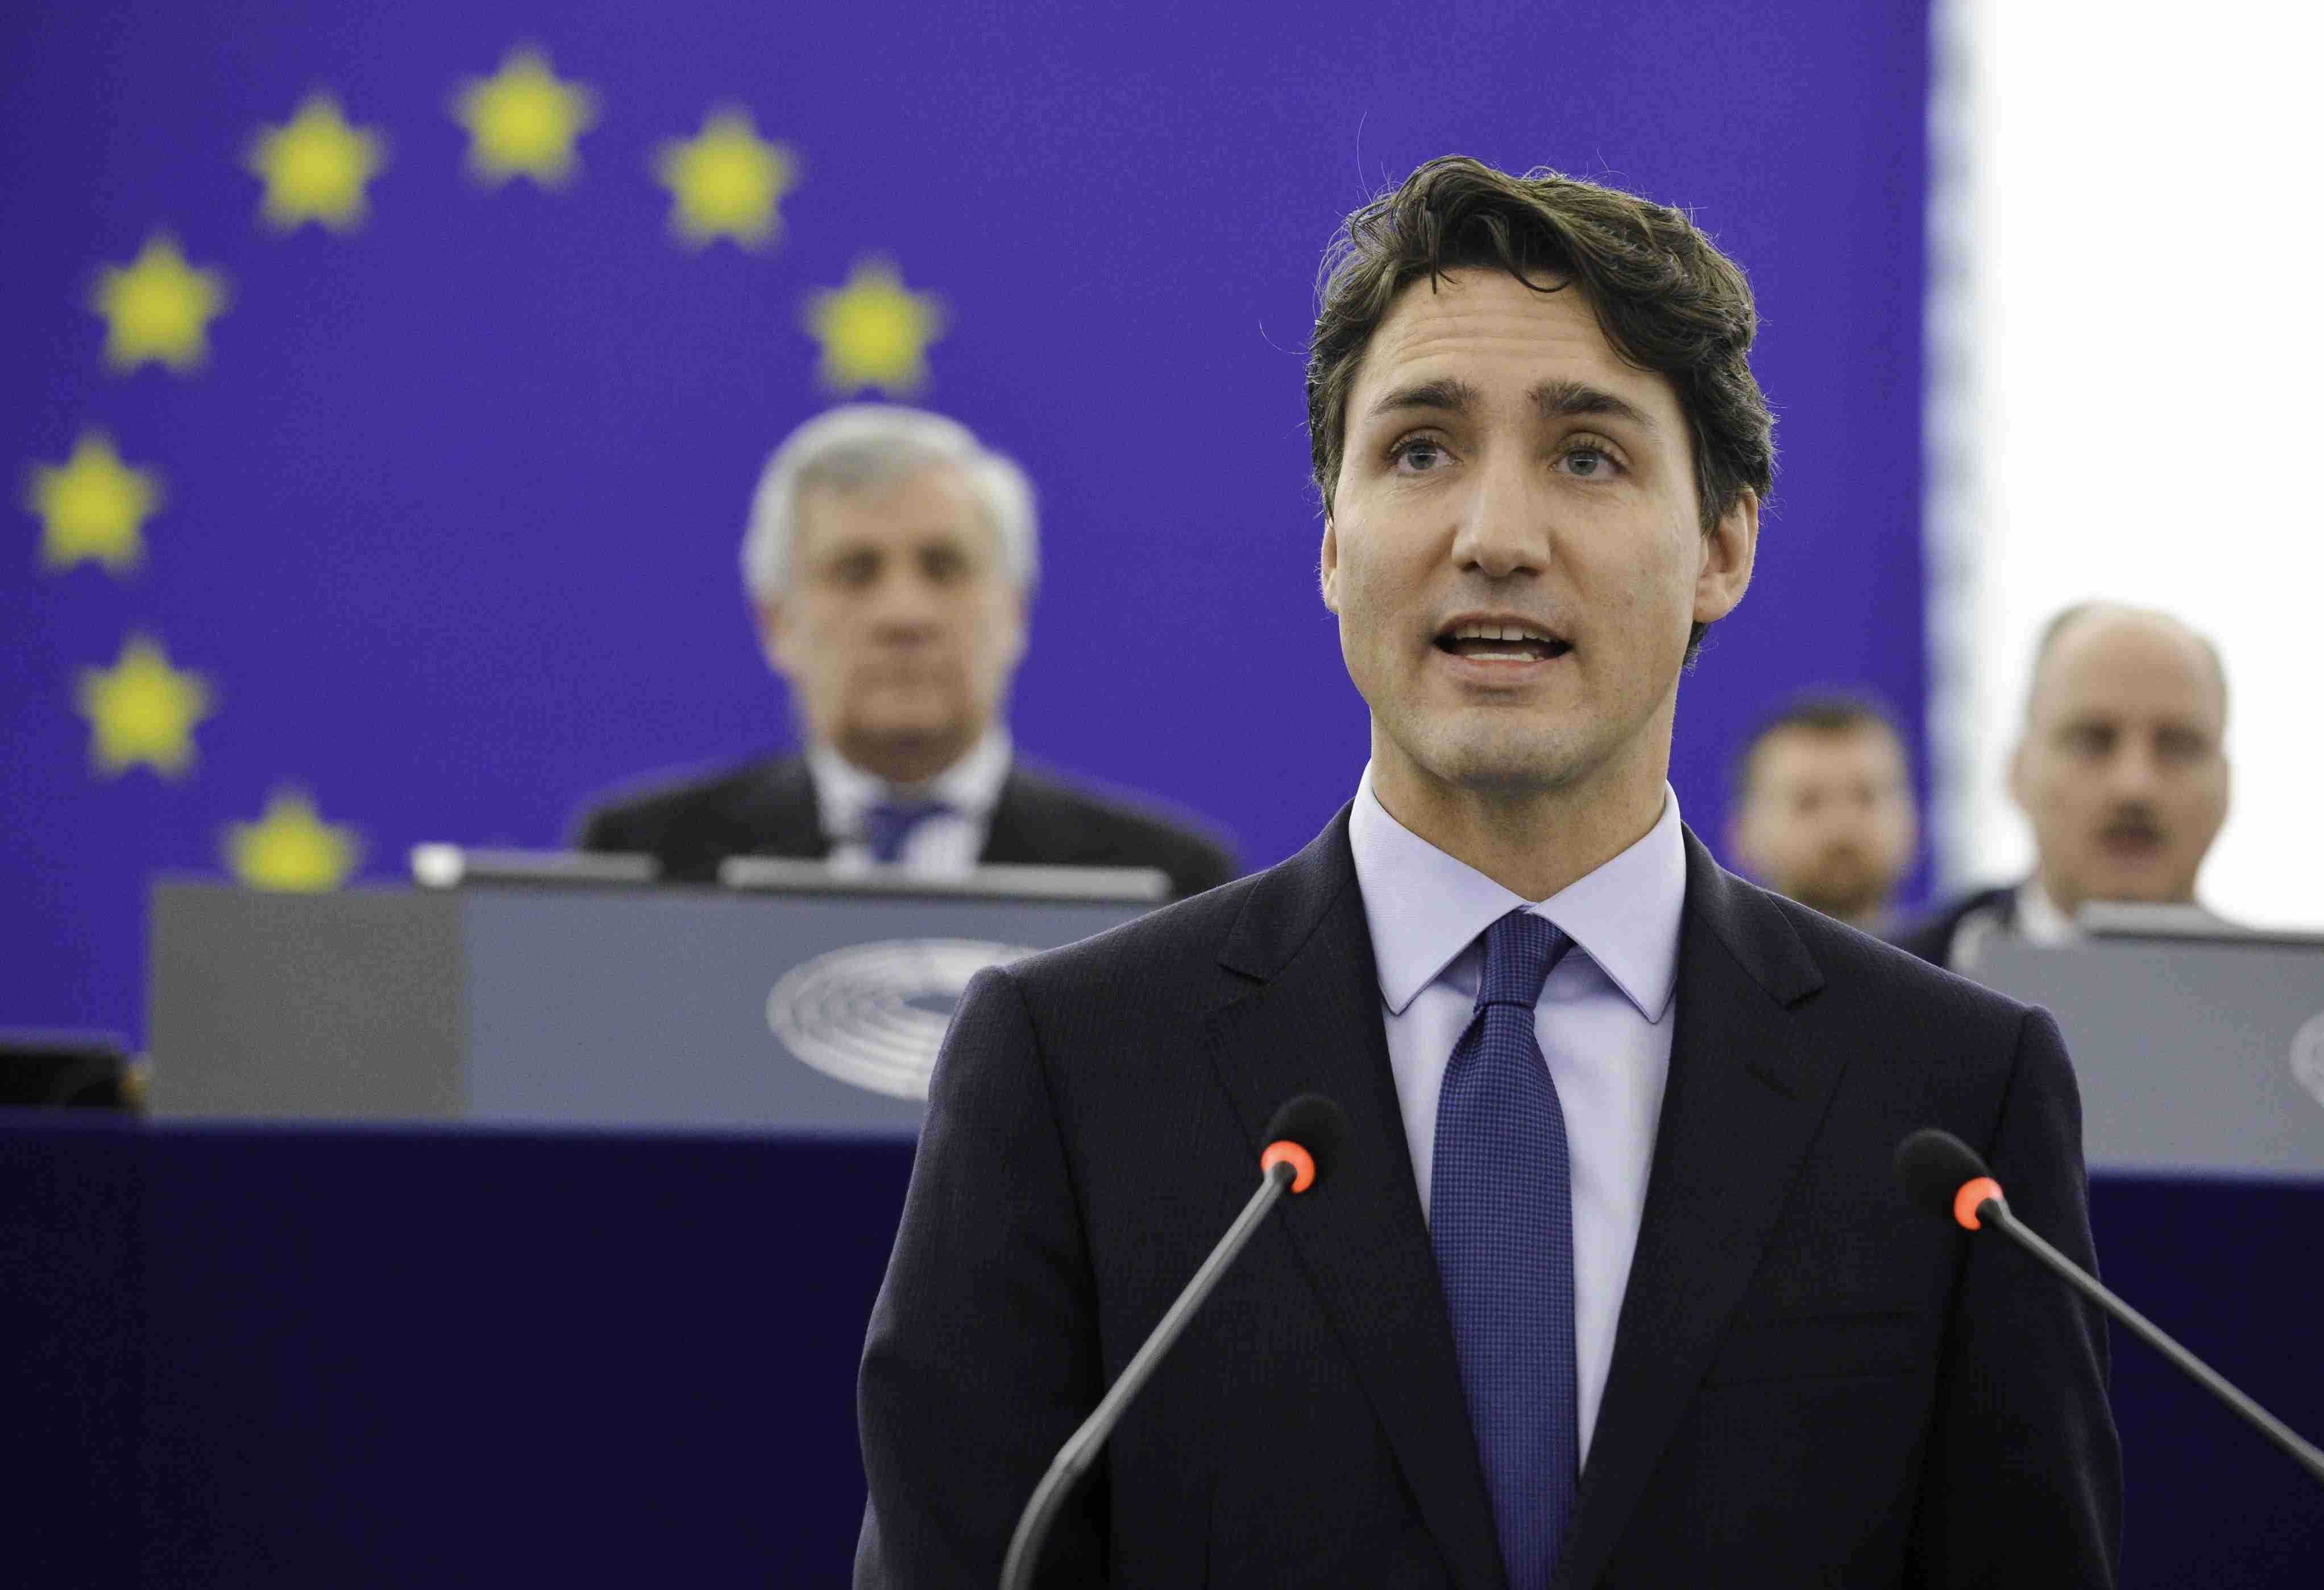 Trudeau: "Peoples' right to self-determination is important"